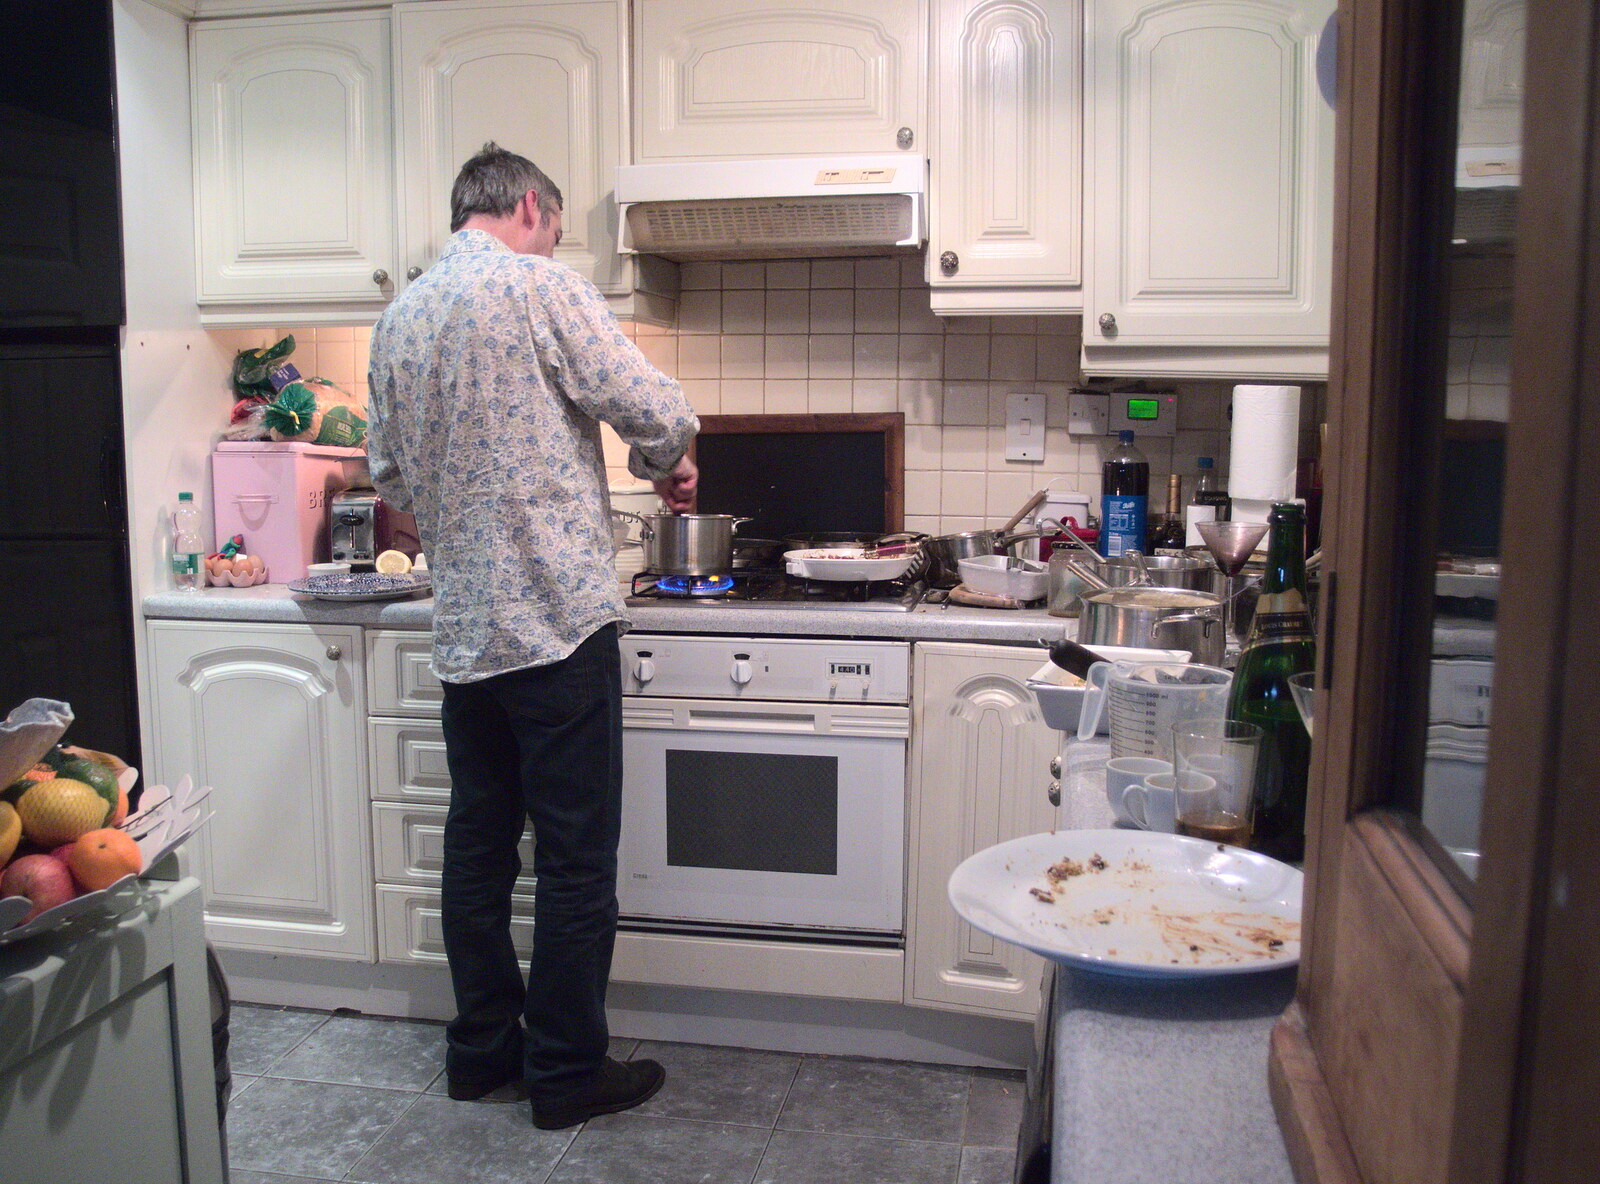 Wayne does his thing in the kitchen from Christmas in Blackrock and St. Stephen's in Ballybrack, Dublin, Ireland - 25th December 2015